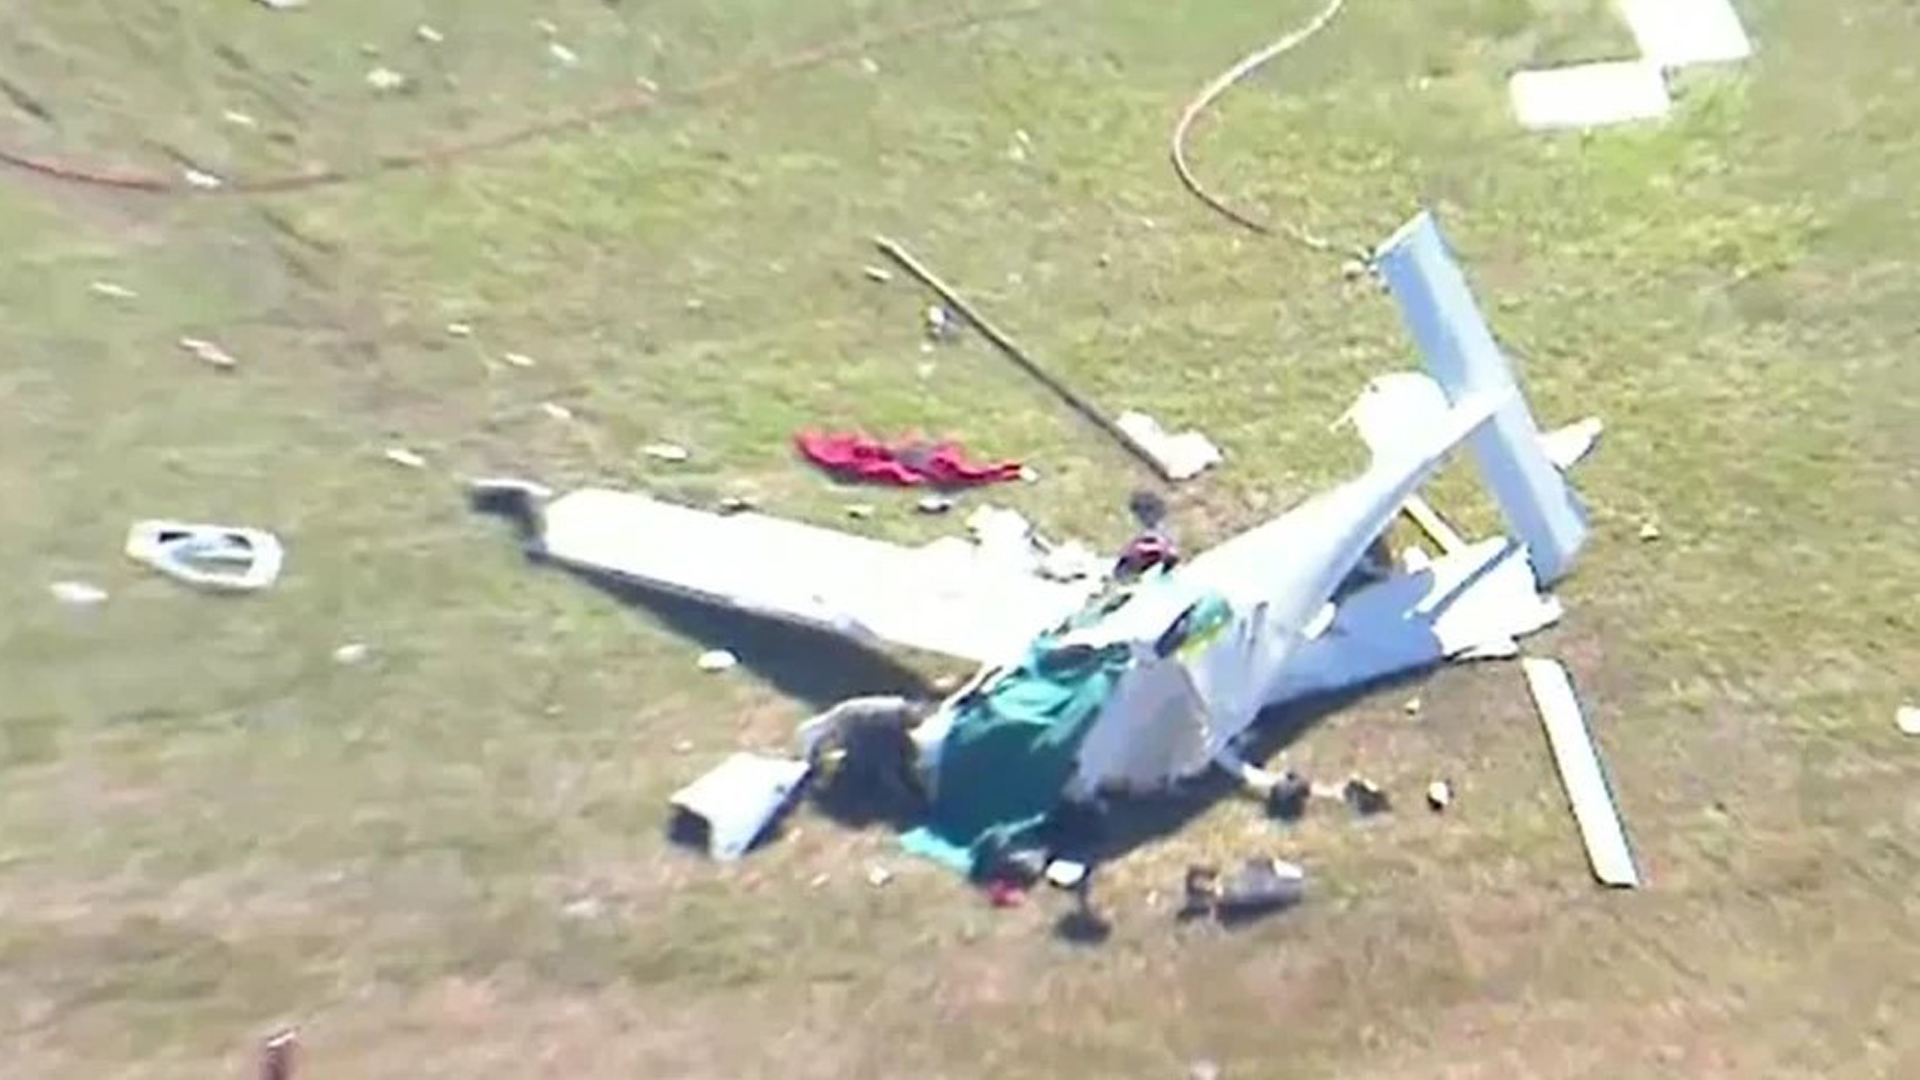 In a mid-air horror collision, two planes crash into each other and kill a woman and man in Brisbane